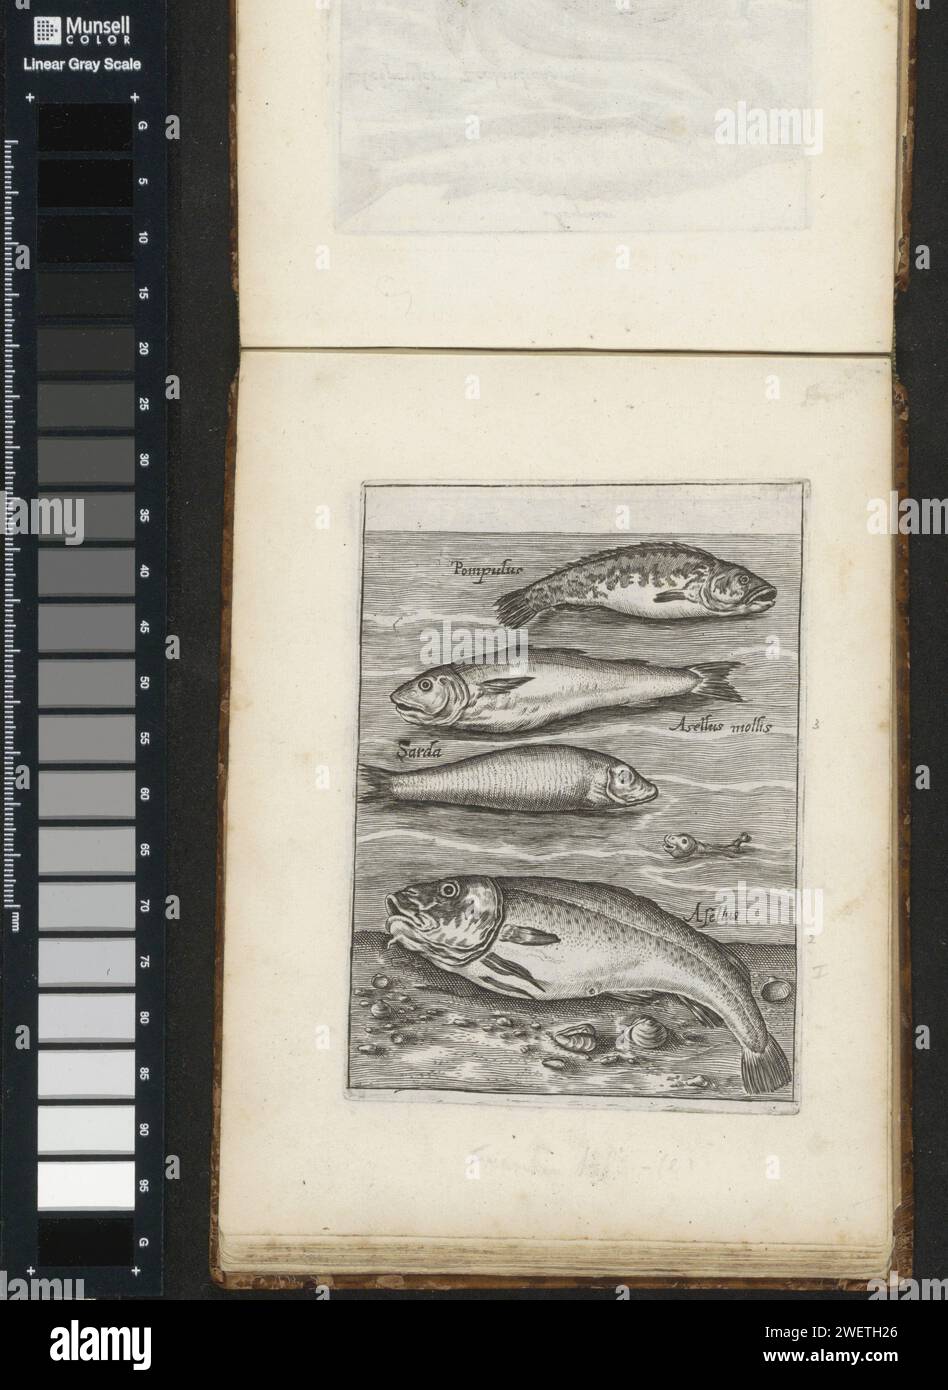 Loodmanje, Wijting, Sarda and Cod, 1635 - 1660 print Four fish. From top to bottom a shed man, whiting, sarda and cod. With each fish the name in Latin. This print is part of an album.  paper engraving bony fishes: cod. fishes Stock Photo